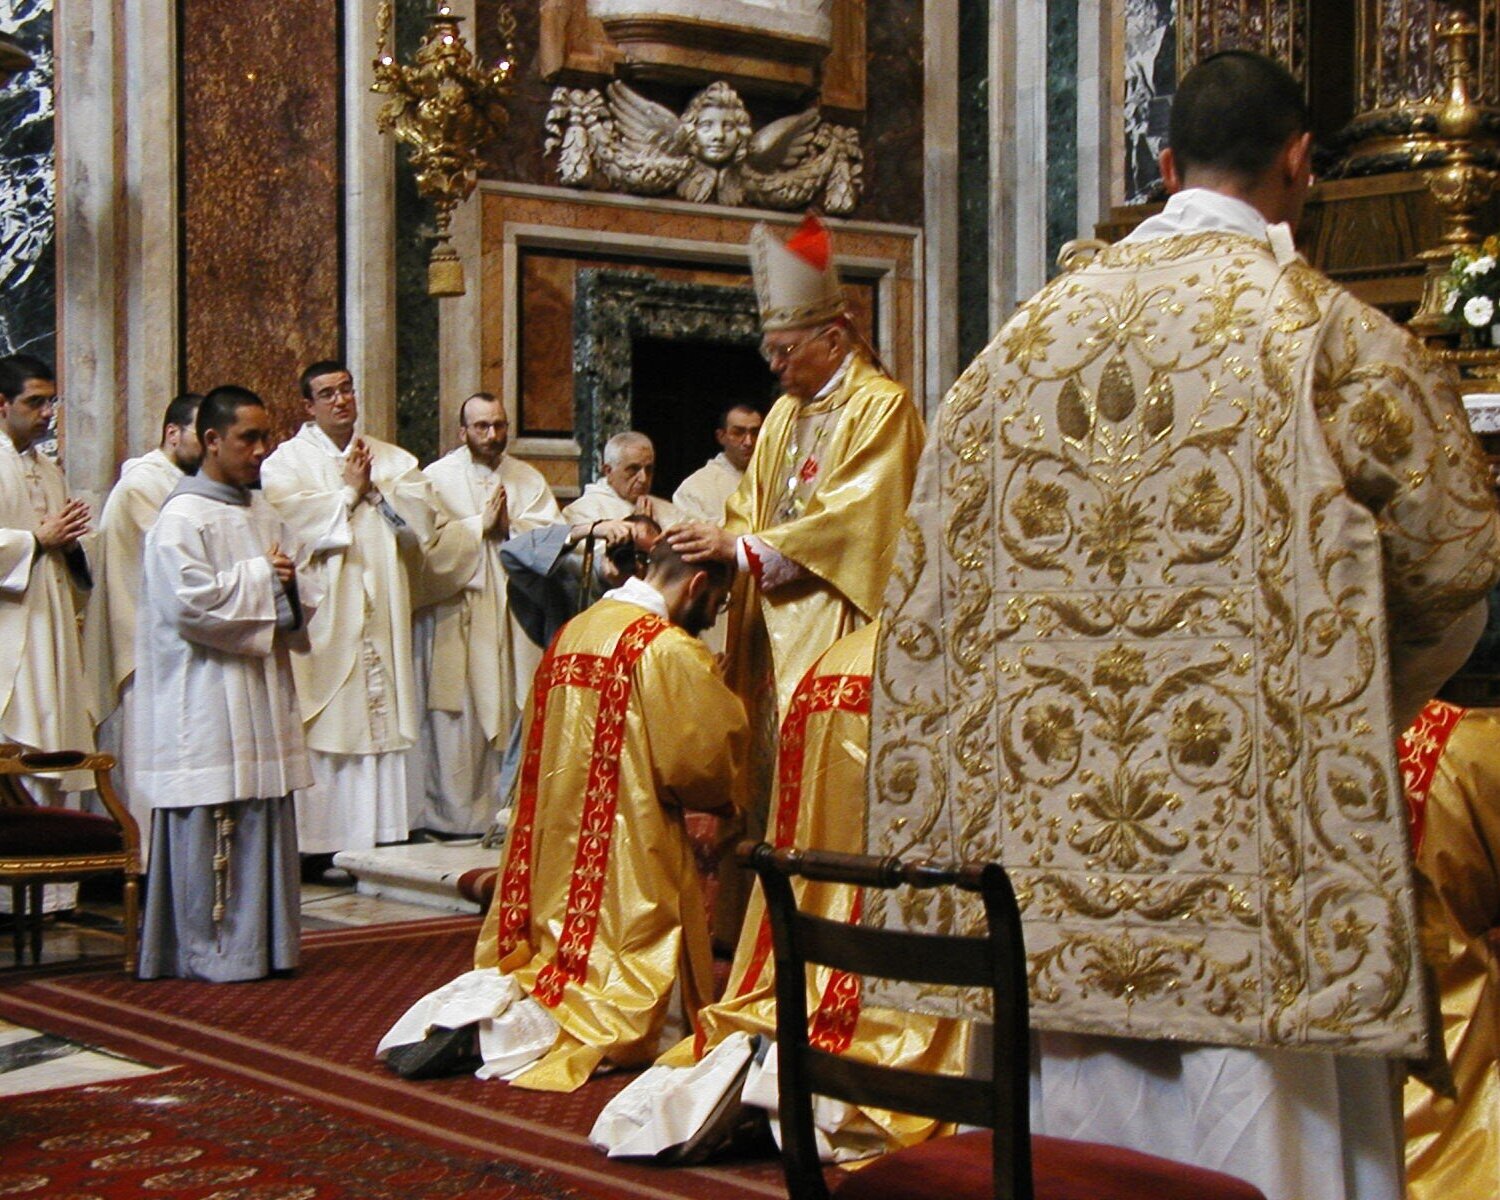 Sacrament of Ordination at St. Peters